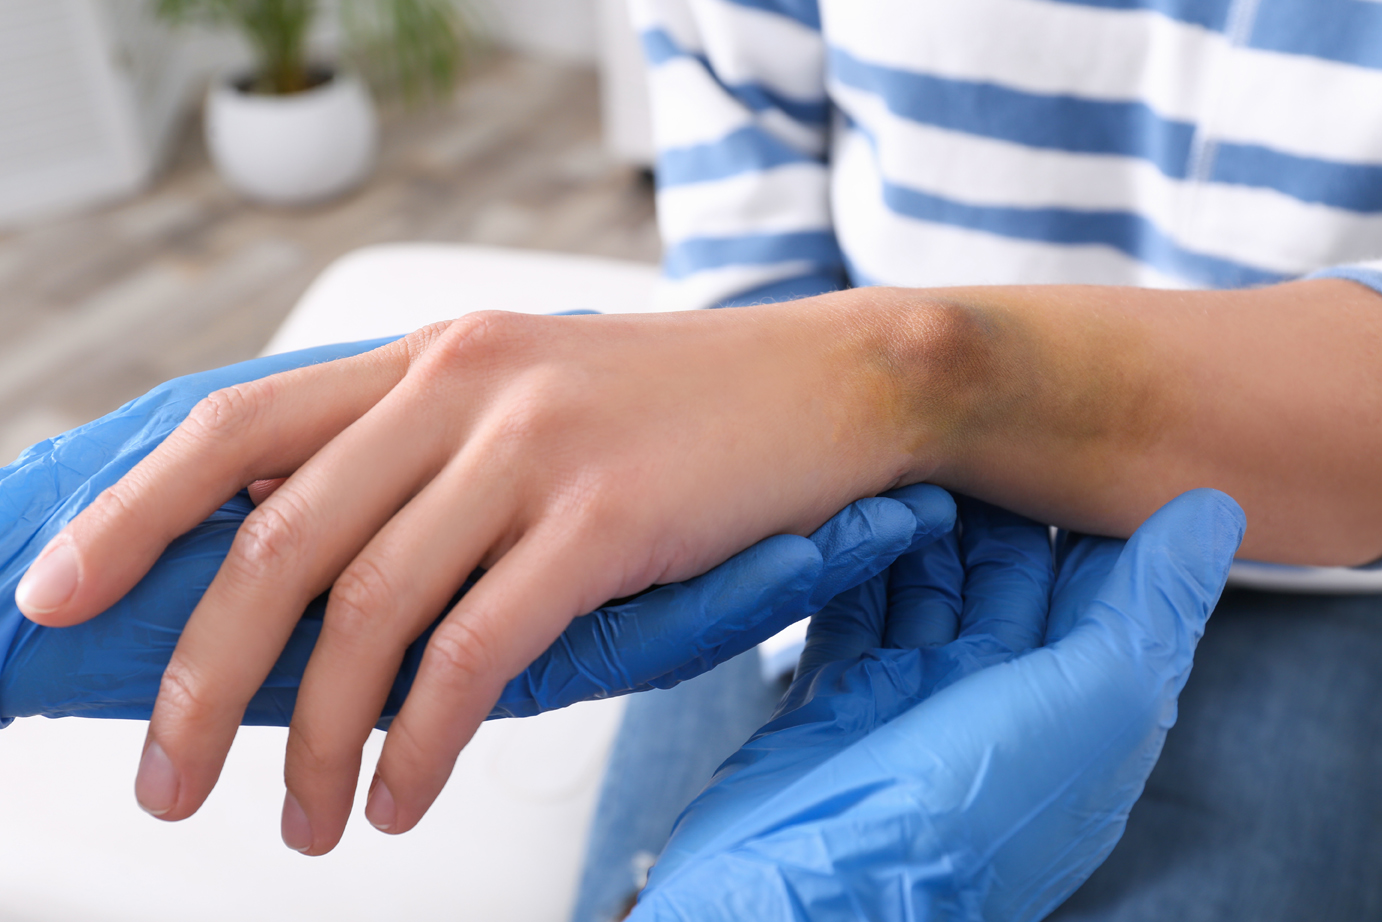 A close-up of the gloved hand of a doctor checking a bruise on a young woman's wrist.